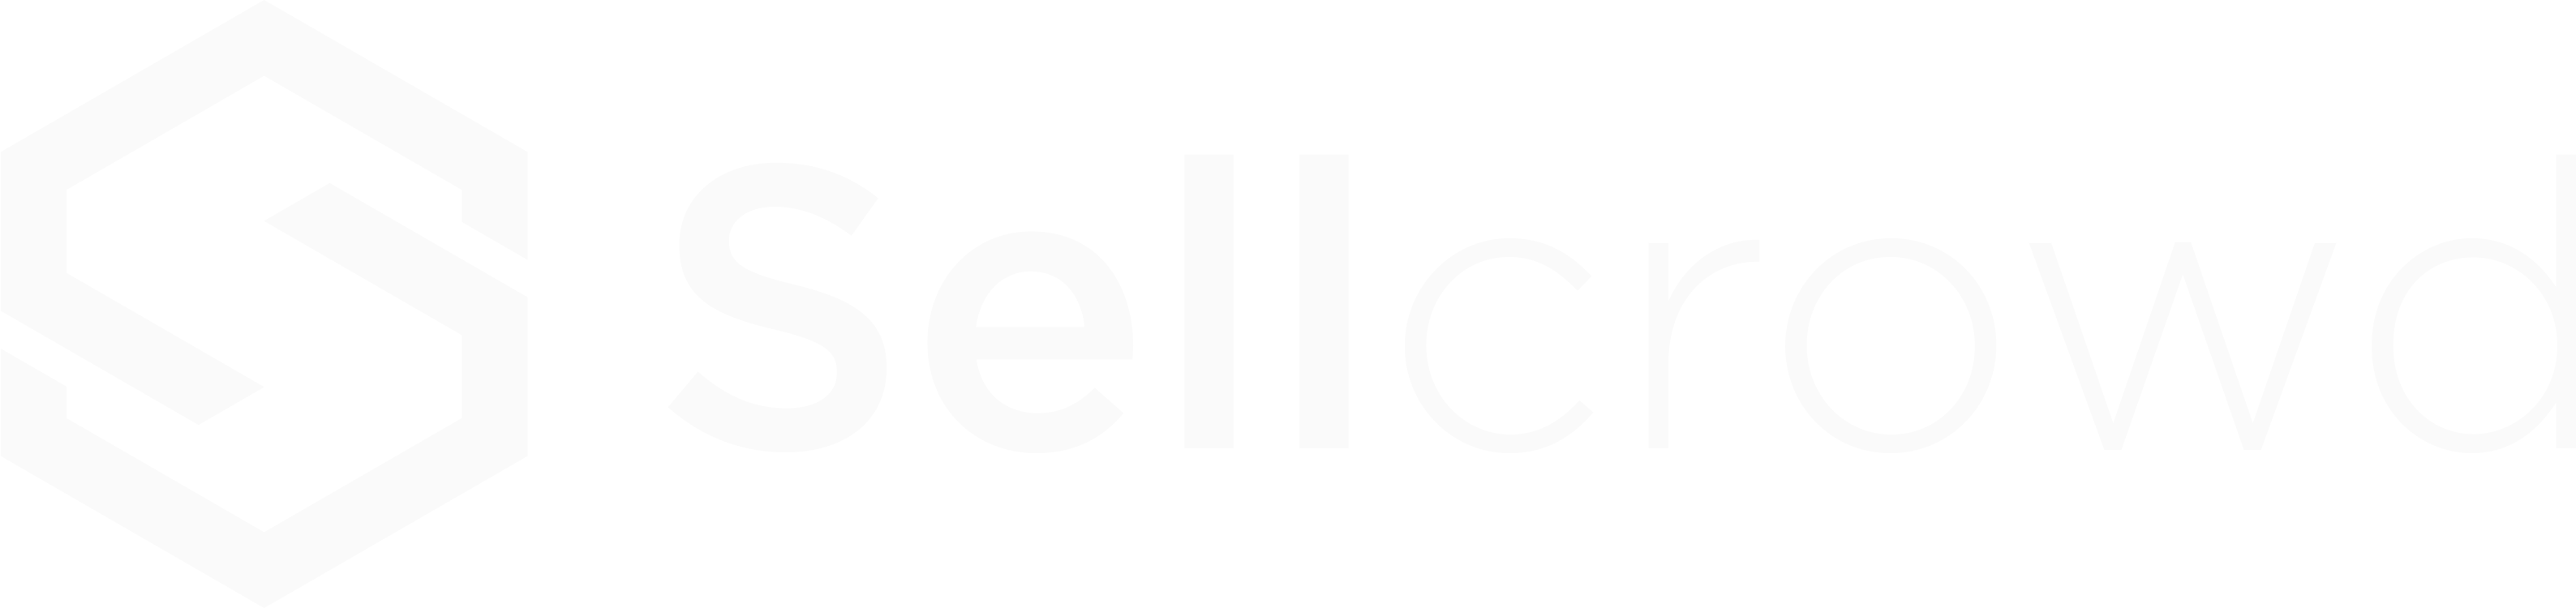 How to Review and Accept a Contract in Sellcrowd?